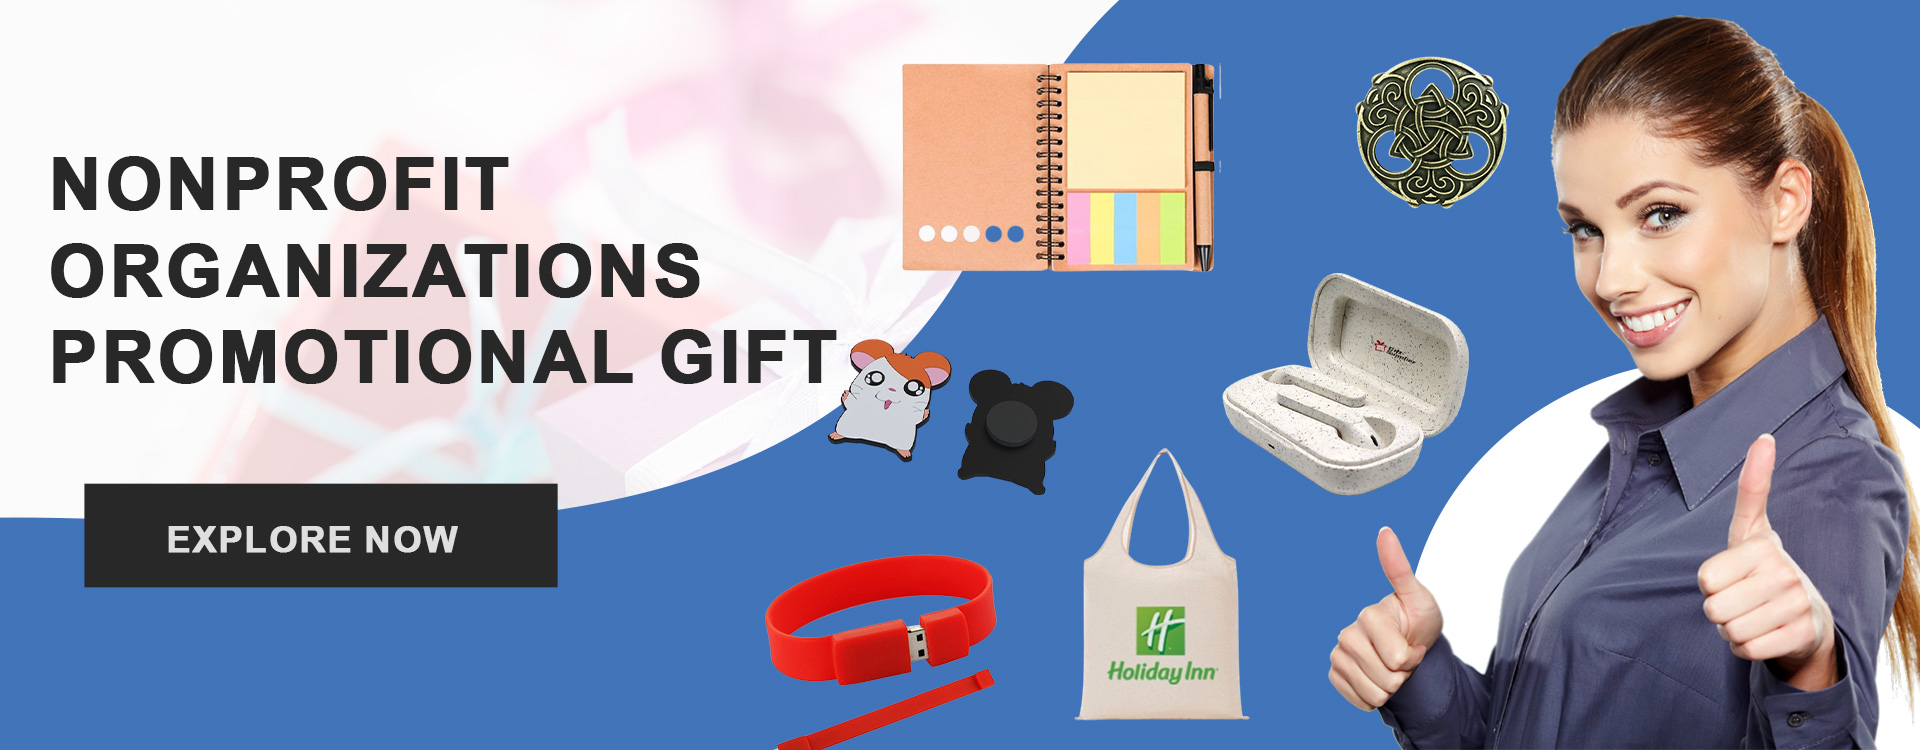 Nonprofit Organizations' Promotional Gifts: Cheap Stuff under $1 with  Customized Appeal